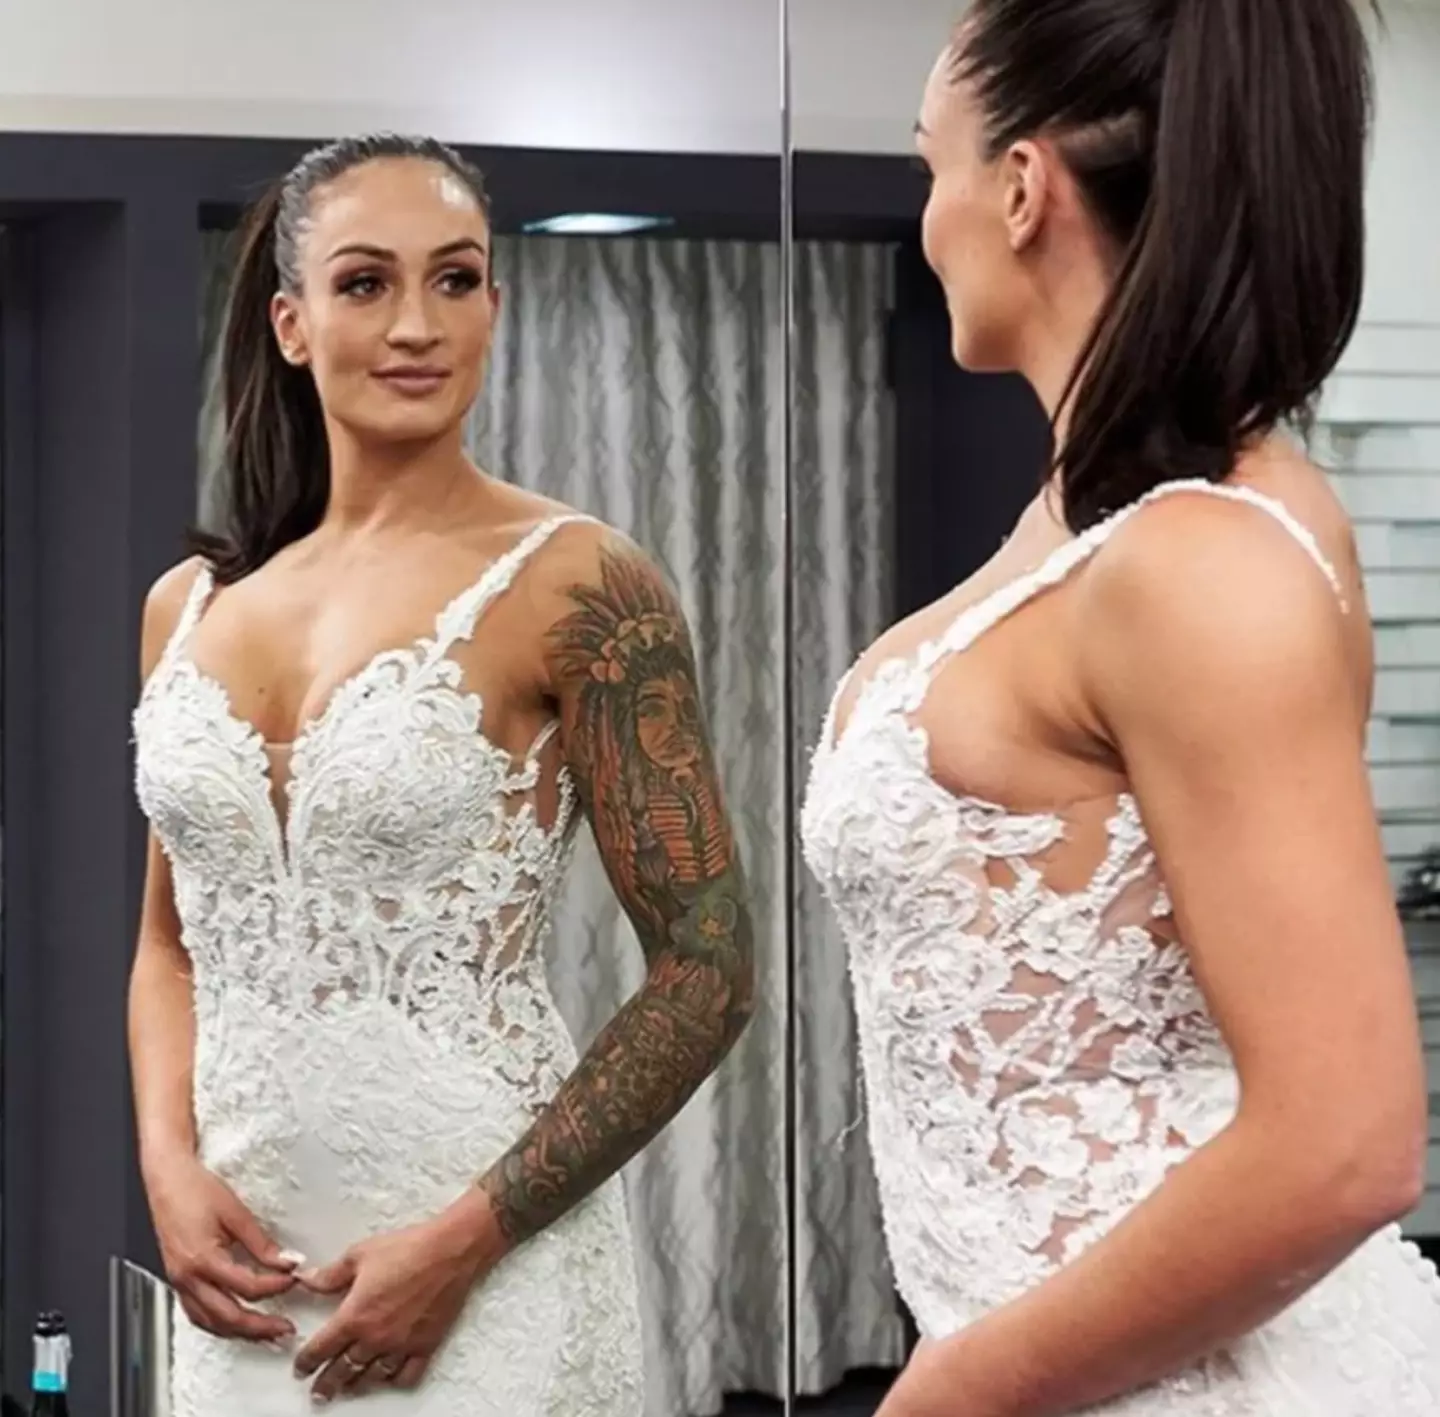 Hayley Vernon made her name on Married at First Sight.